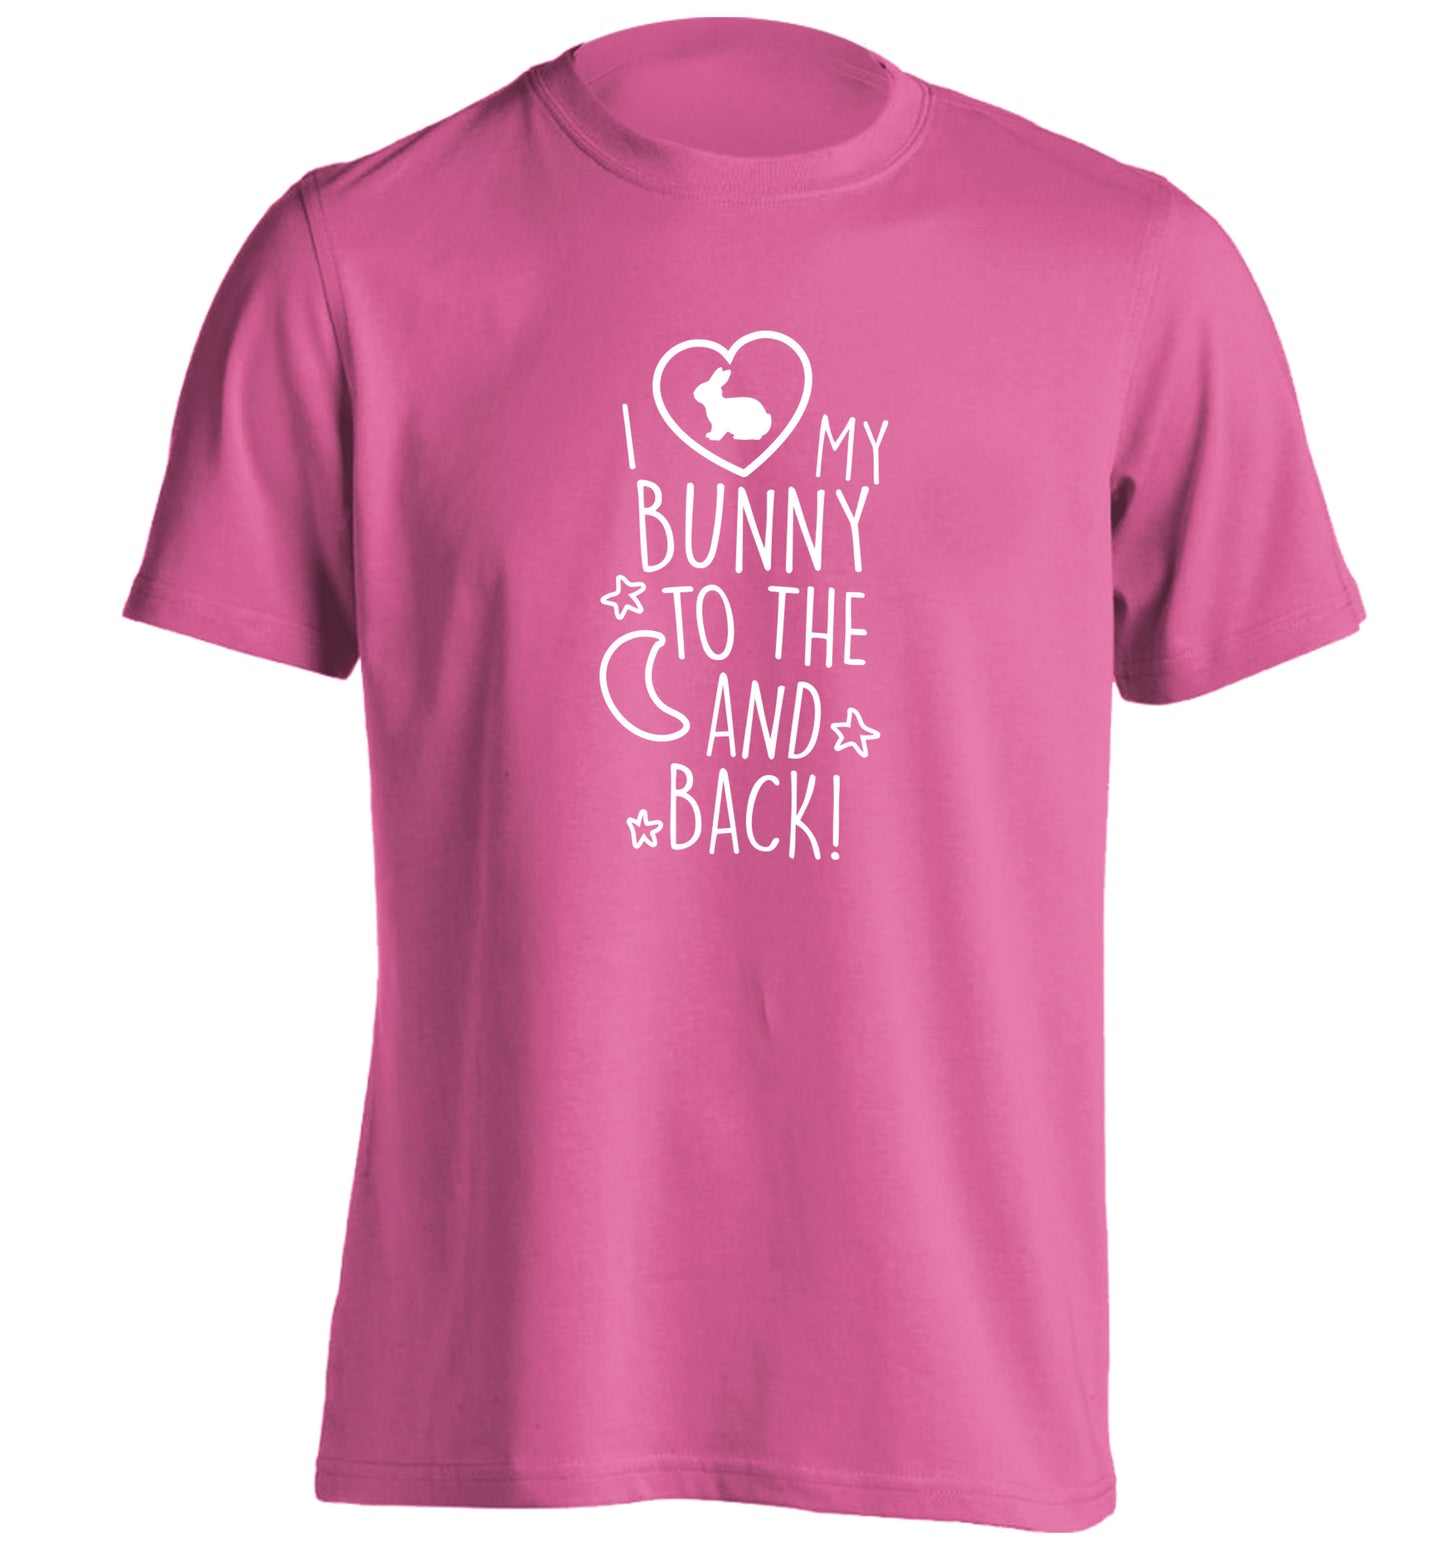 I love my bunny to the moon and back adults unisex pink Tshirt 2XL